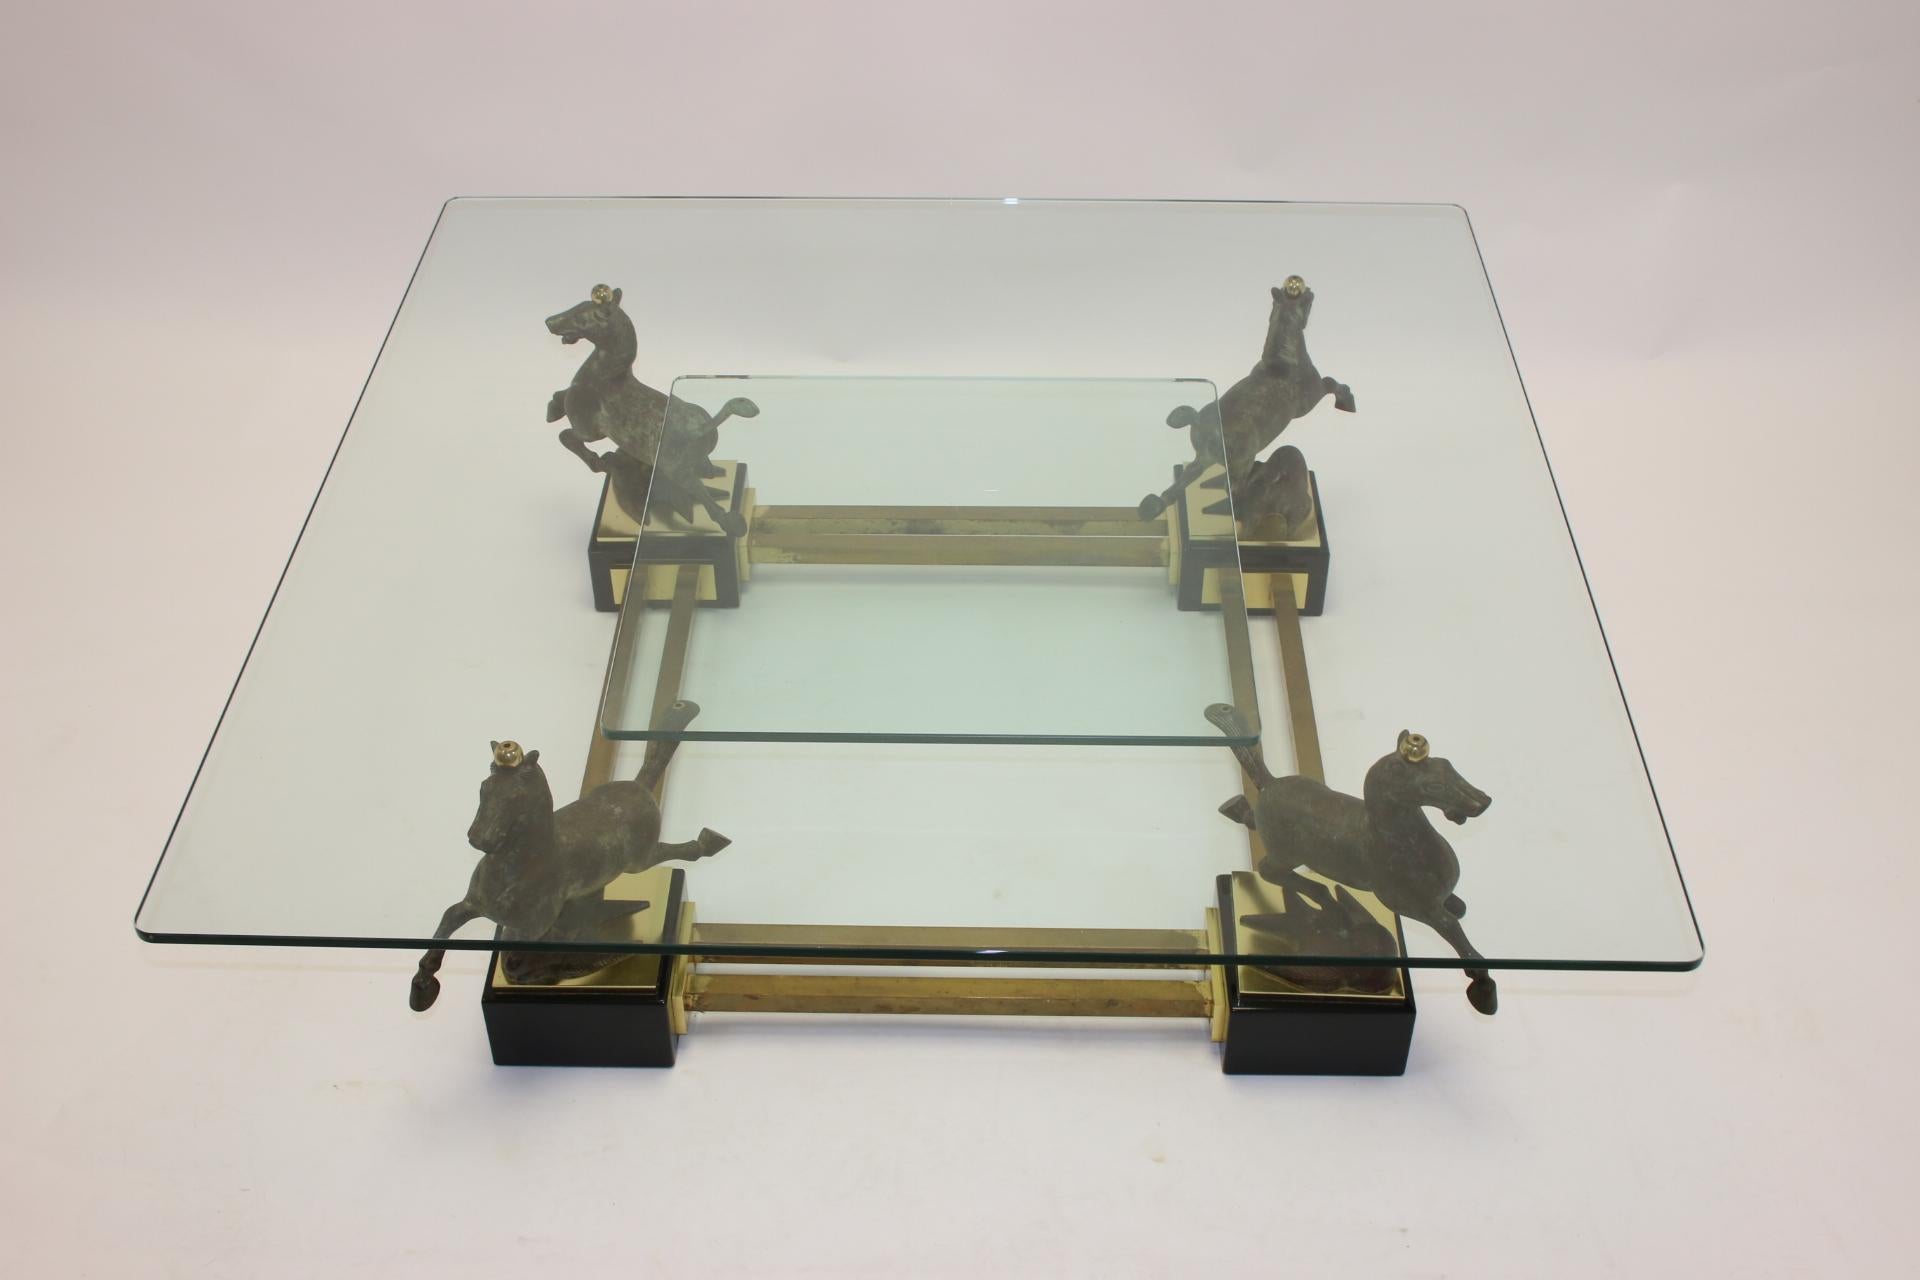 Maison Charles bronze coffee table with horses and 2 glass plates


The design at Maison Charles and bronze and patinated metal is with 4 stone or stone veneered block skirting boards.

A truly unique piece of craftsmanship with varied use of